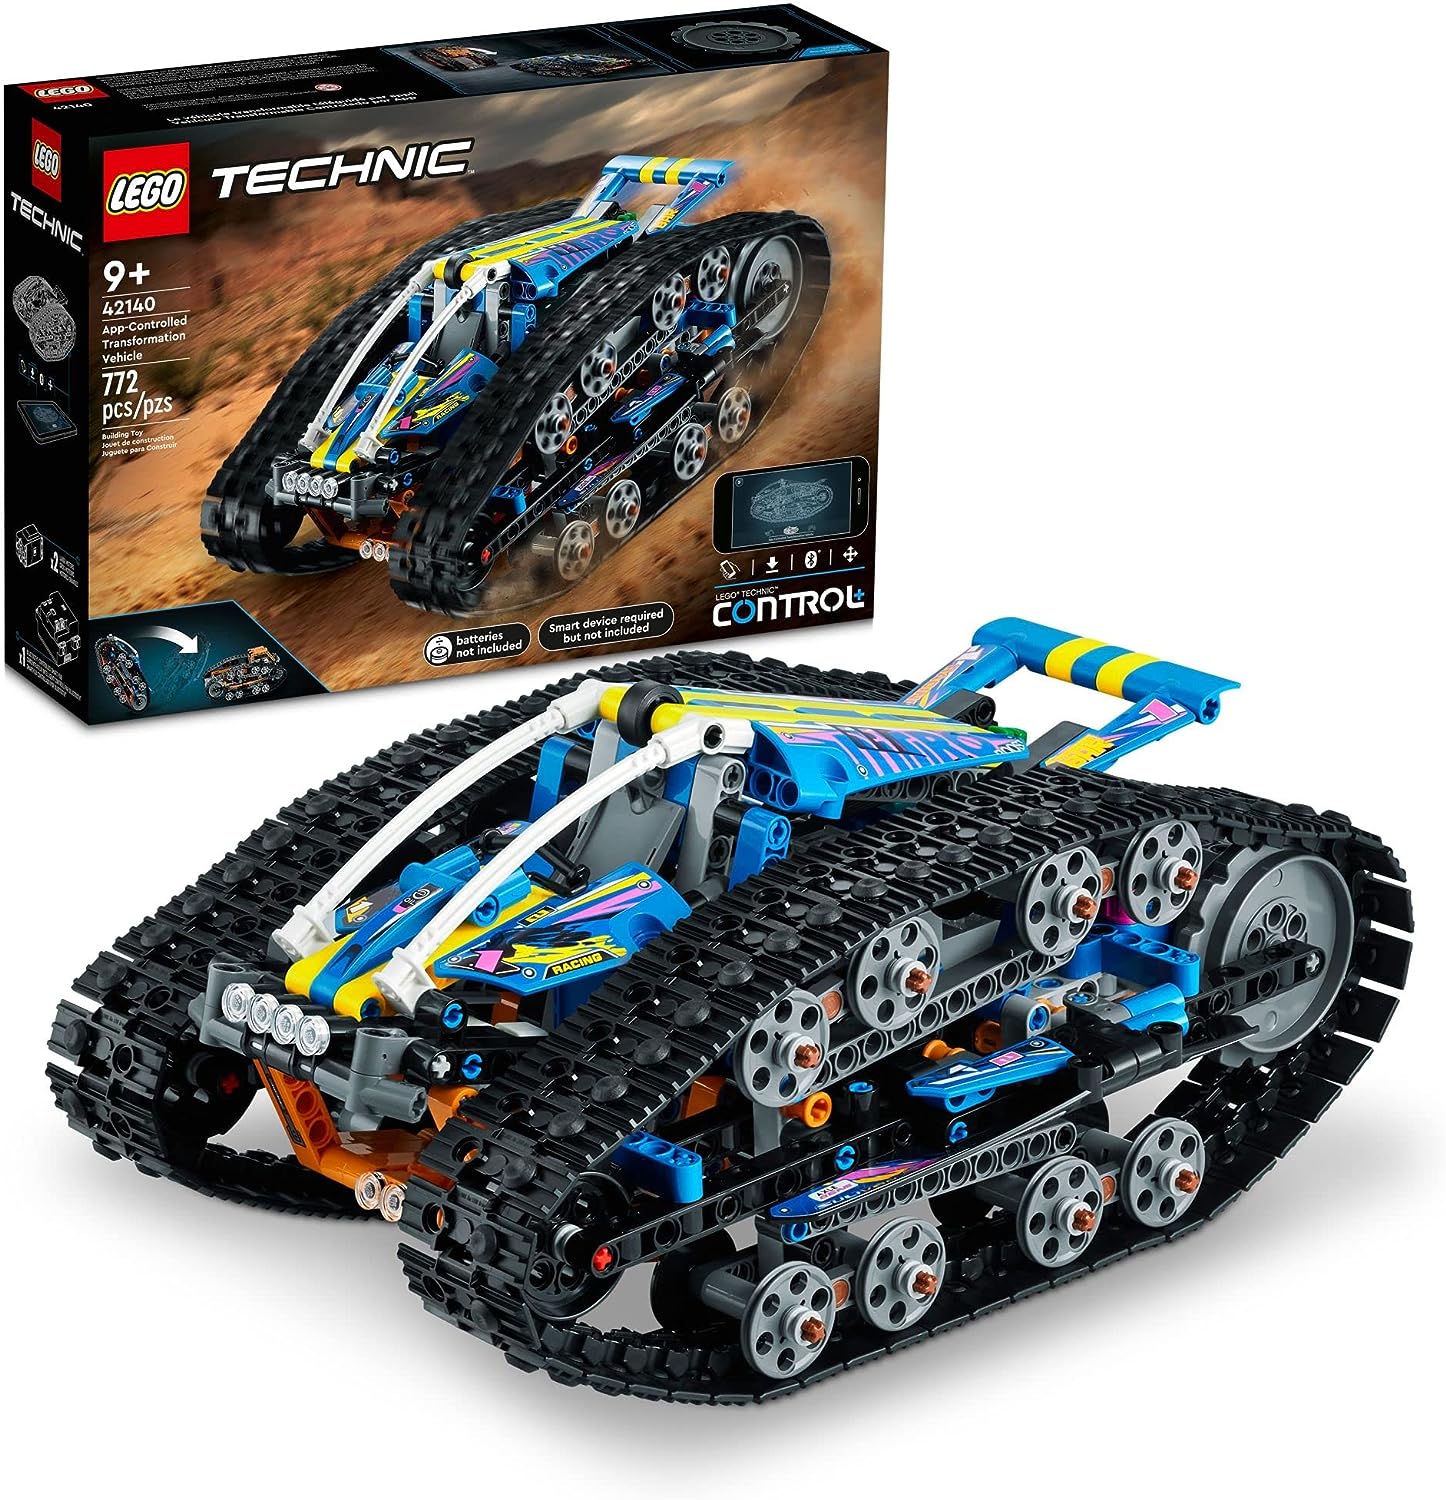 Review: LEGO Technic App-Controlled Transformation Vehicle 42140 – A Must-Have RC Car for Kids